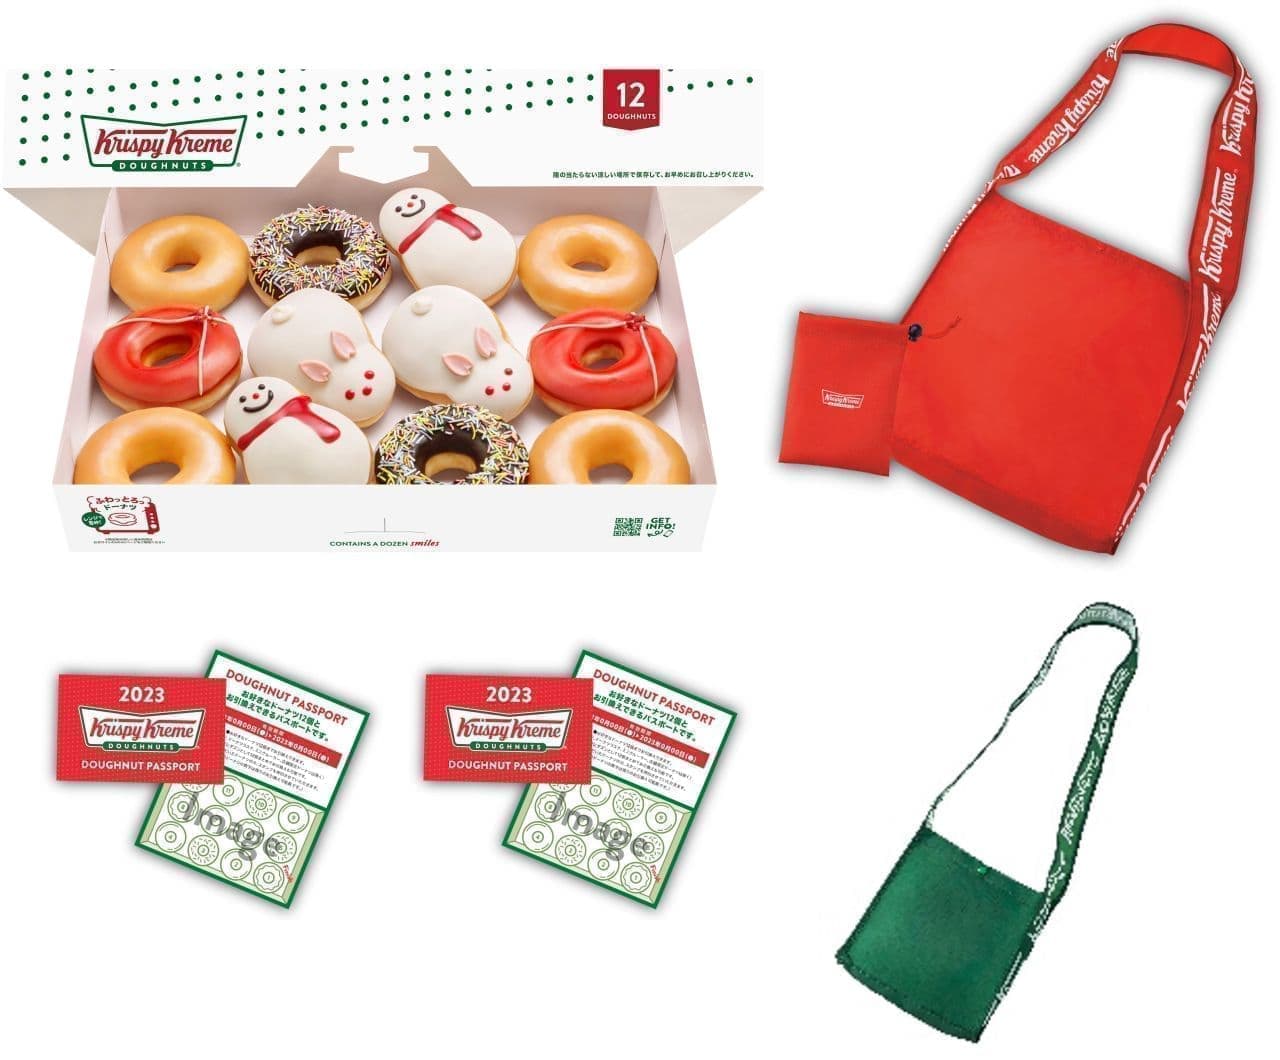 KKD will also be offering the annual Krispy Kreme Doughnuts 2023 gift bag featuring next year's zodiac sign, the rabbit motif, red and white doughnuts, and the annual Krispy Kreme Doughnuts gift bag.